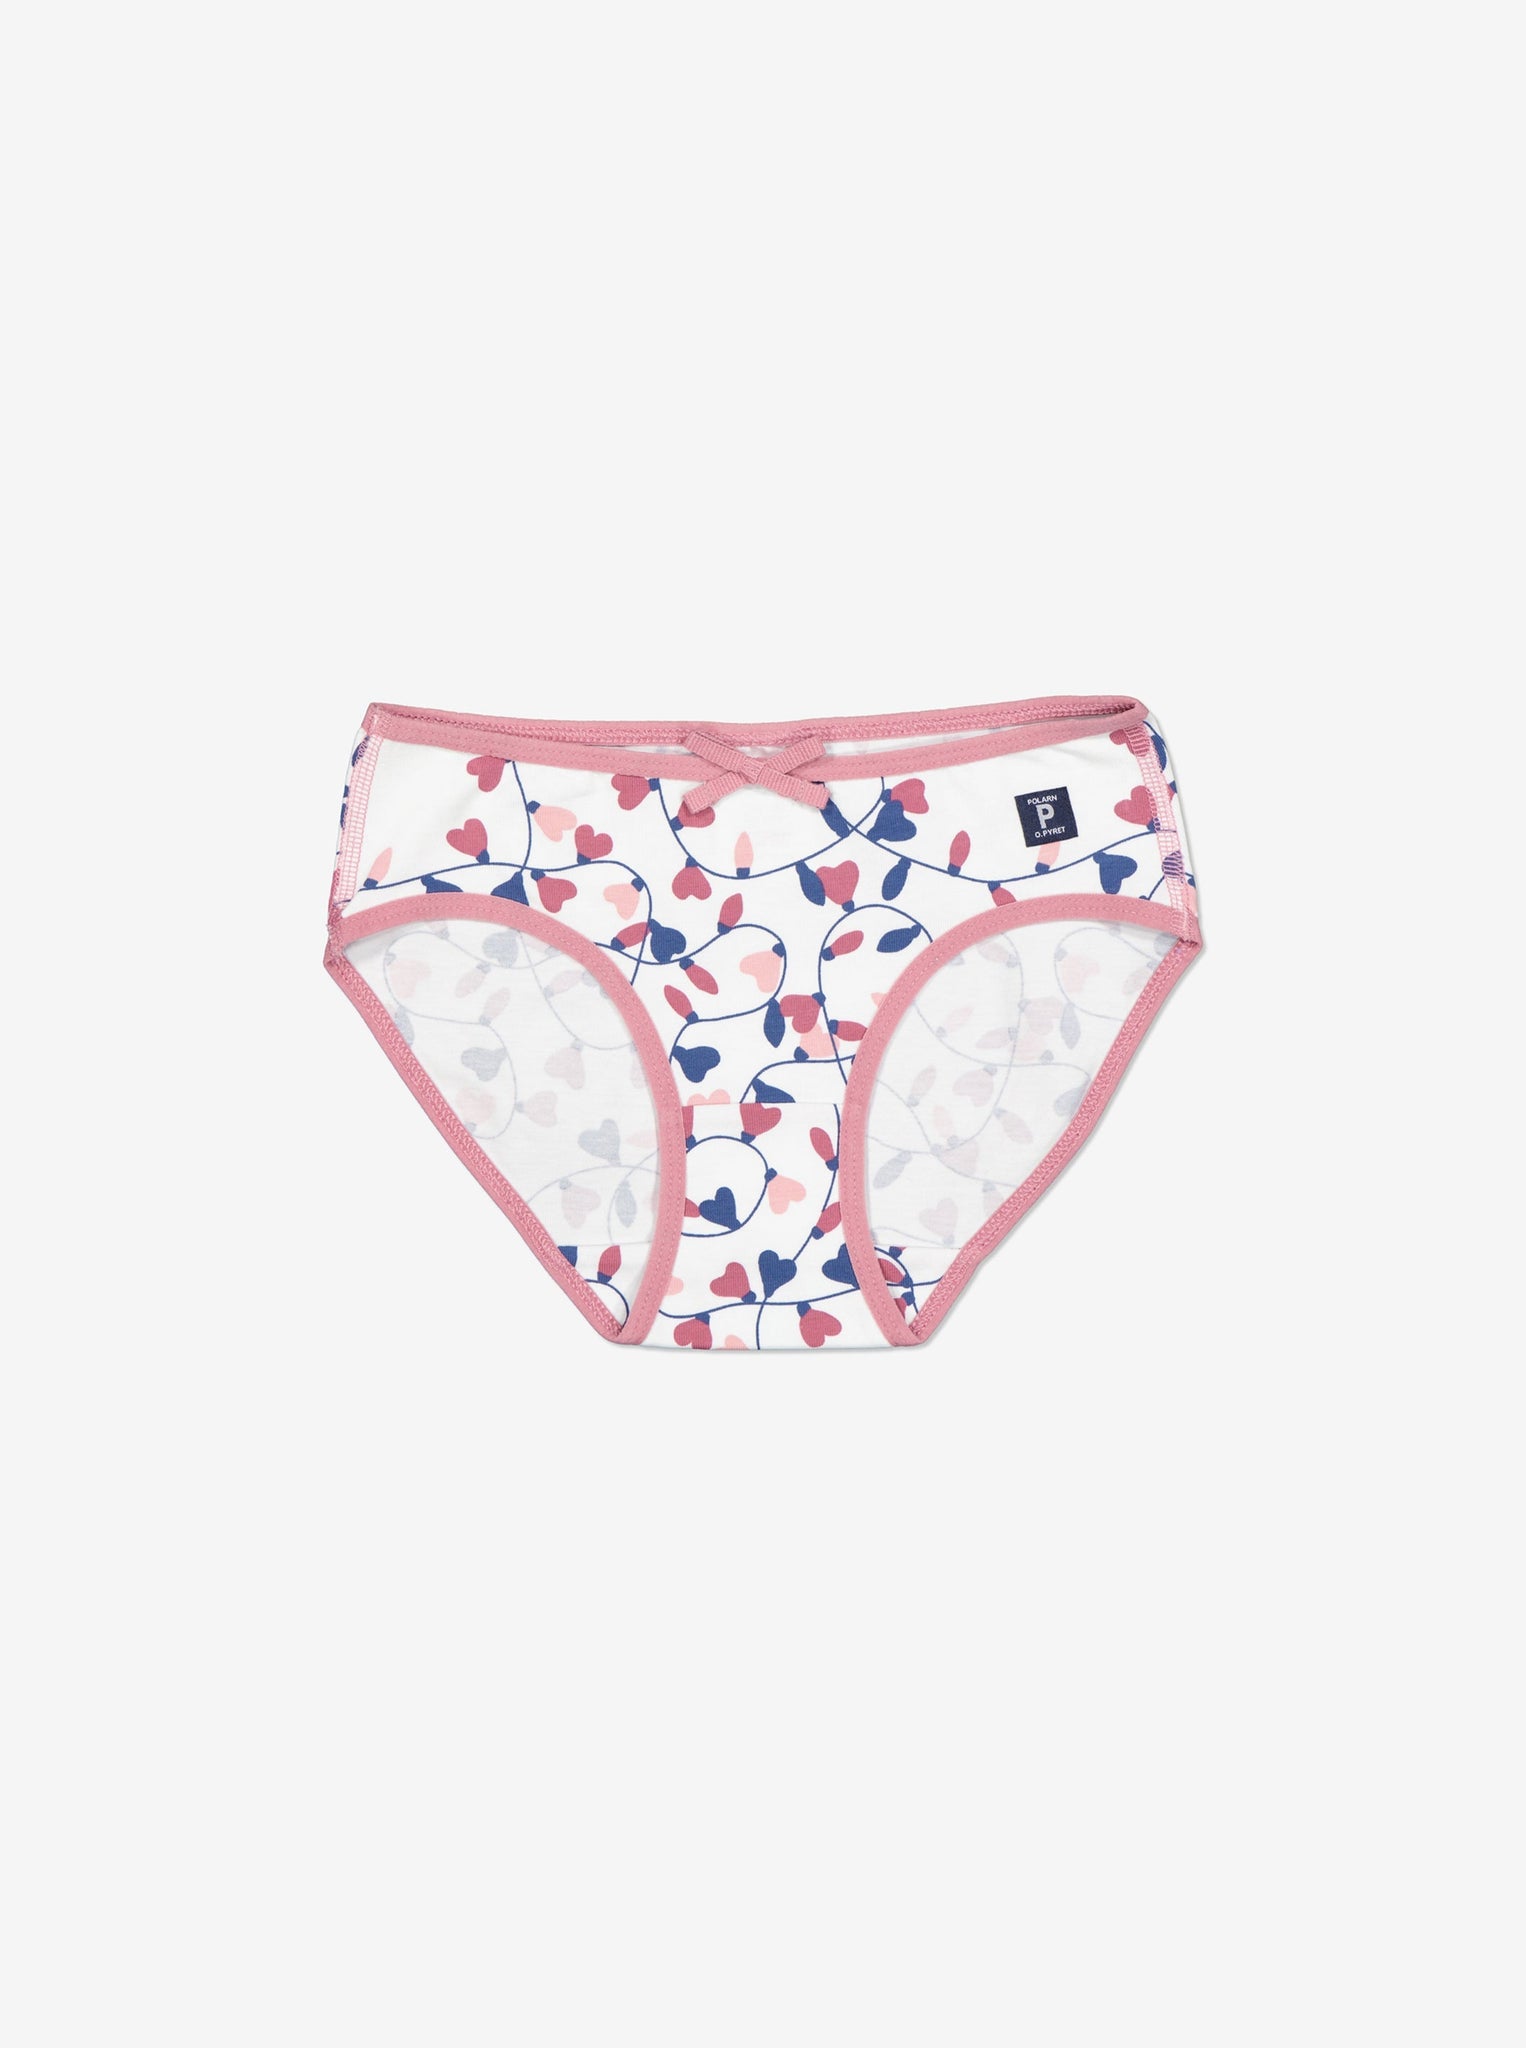 Organic Cotton White Girls Briefs from the Polarn O. Pyret kidswear collection. Ethically produced kids clothing.